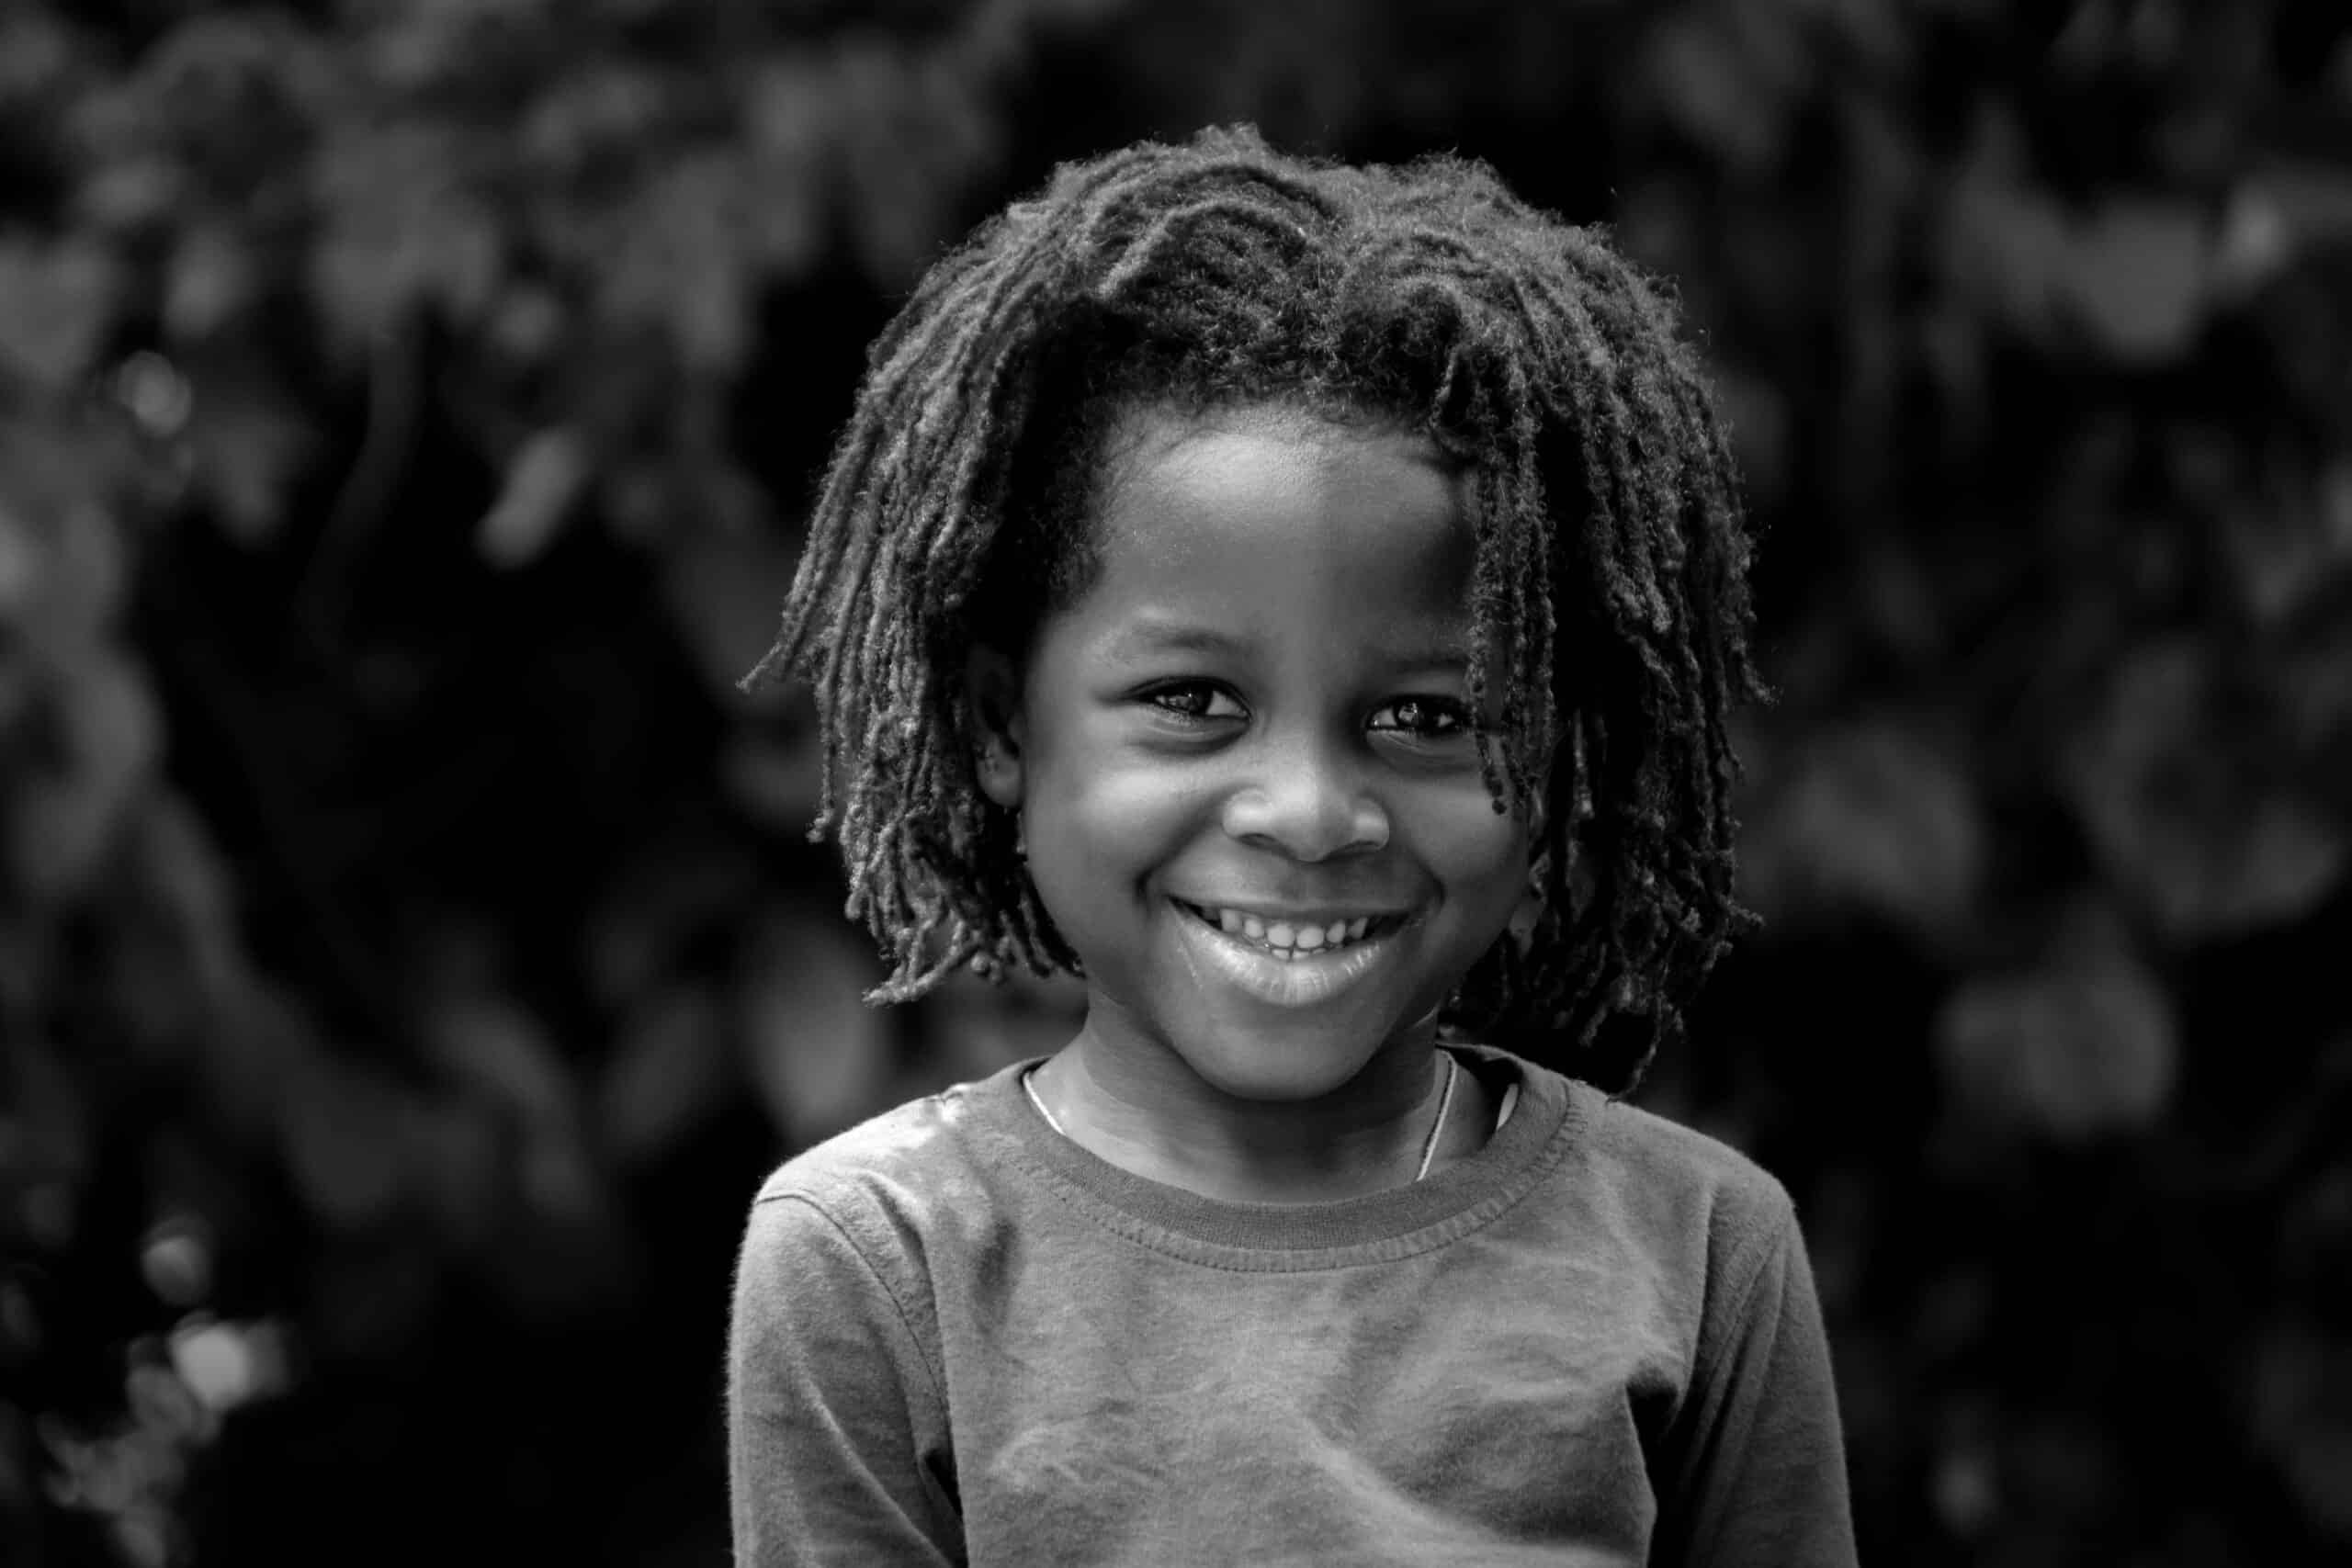 Image of a boy smiling